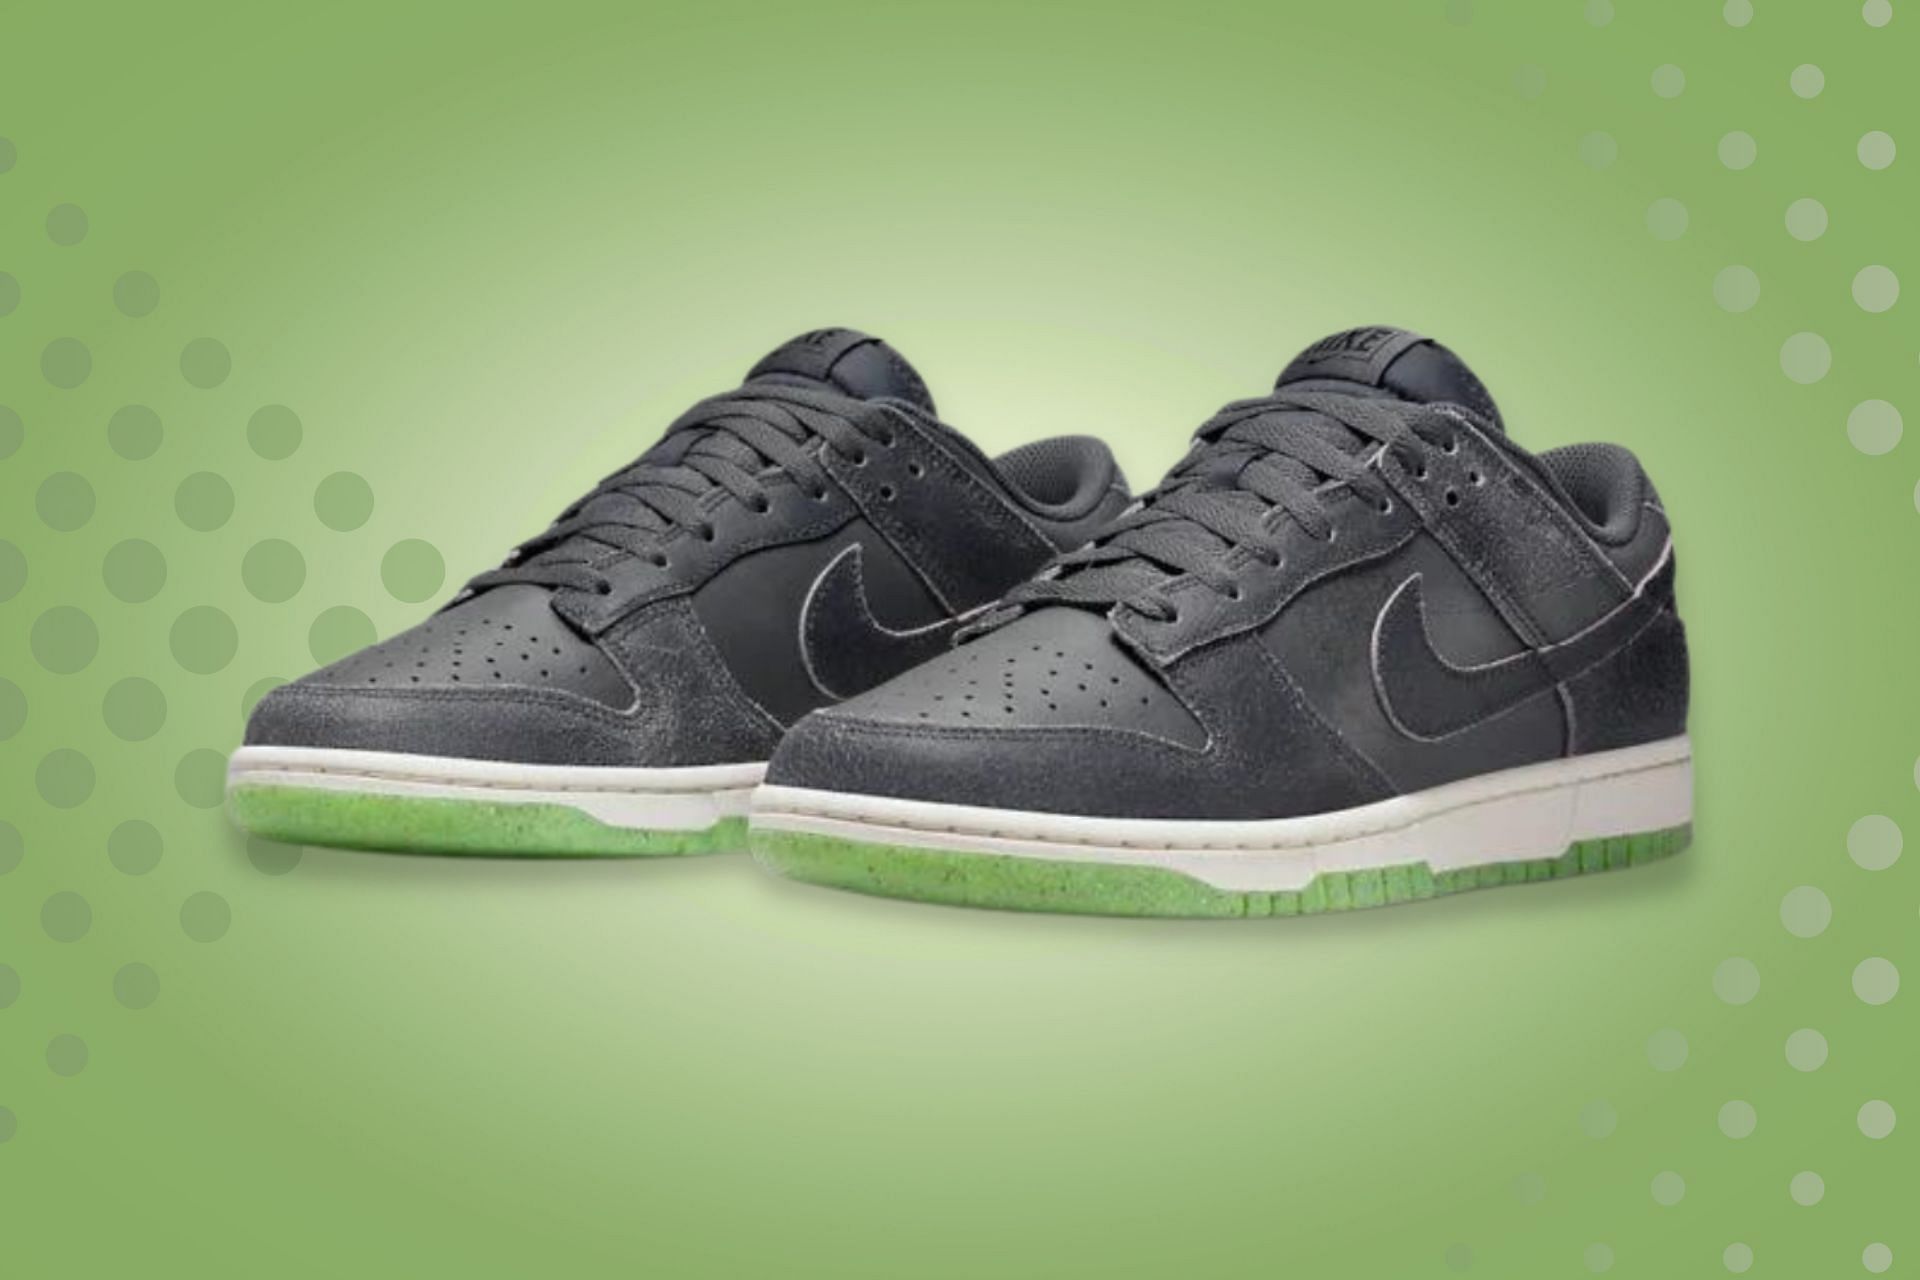 Where roger federer nike tennis shoes to buy Nike Dunk Low “Halloween” shoes? Price, release date